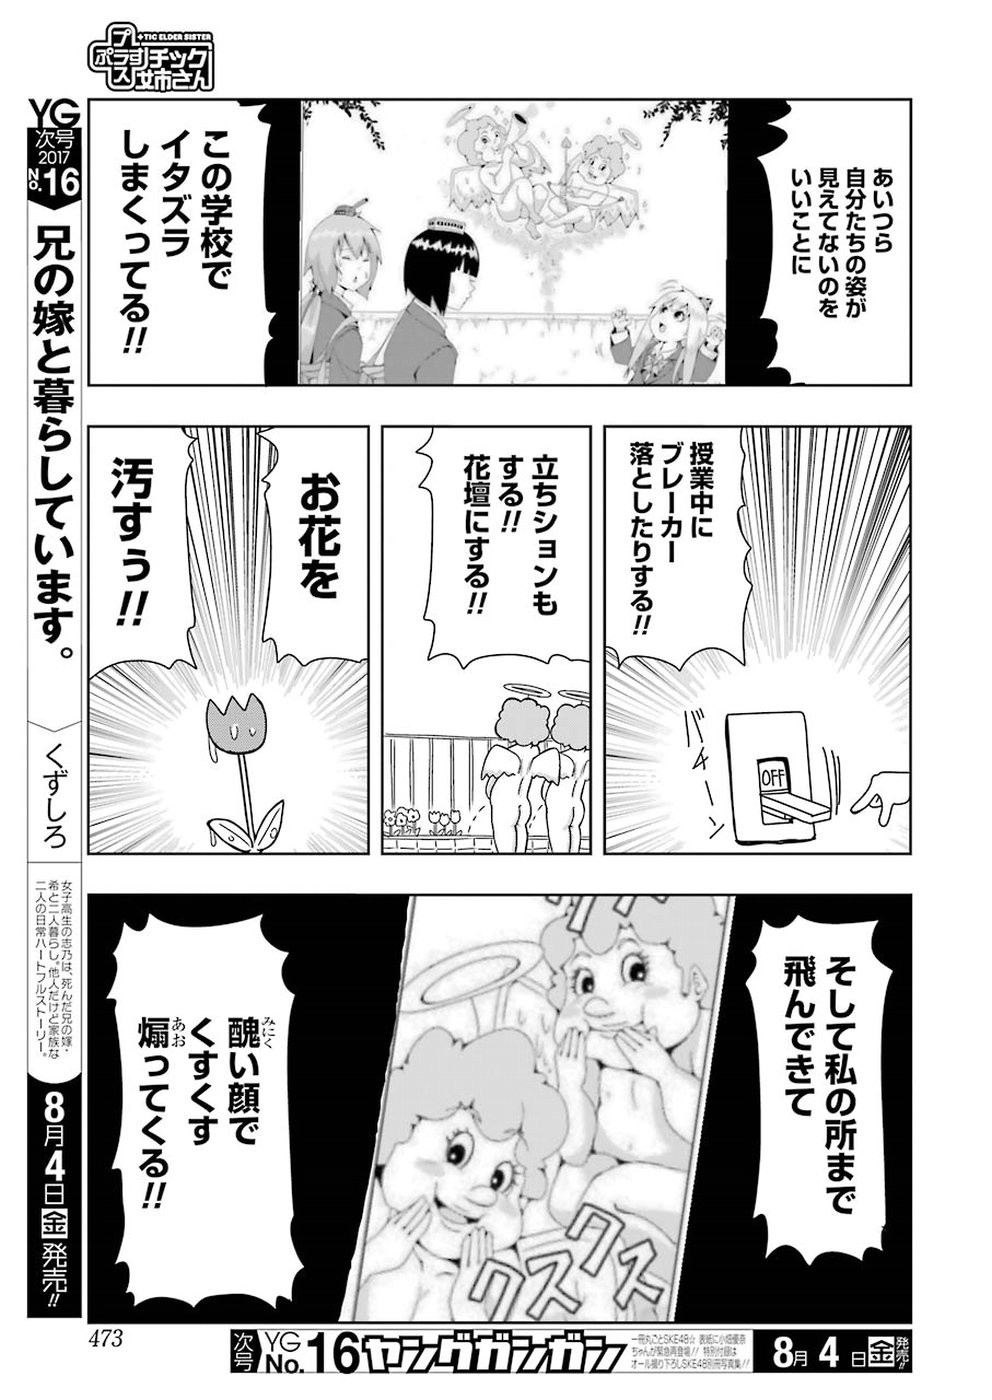 + Tic Nee-san - Chapter 149 - Page 3